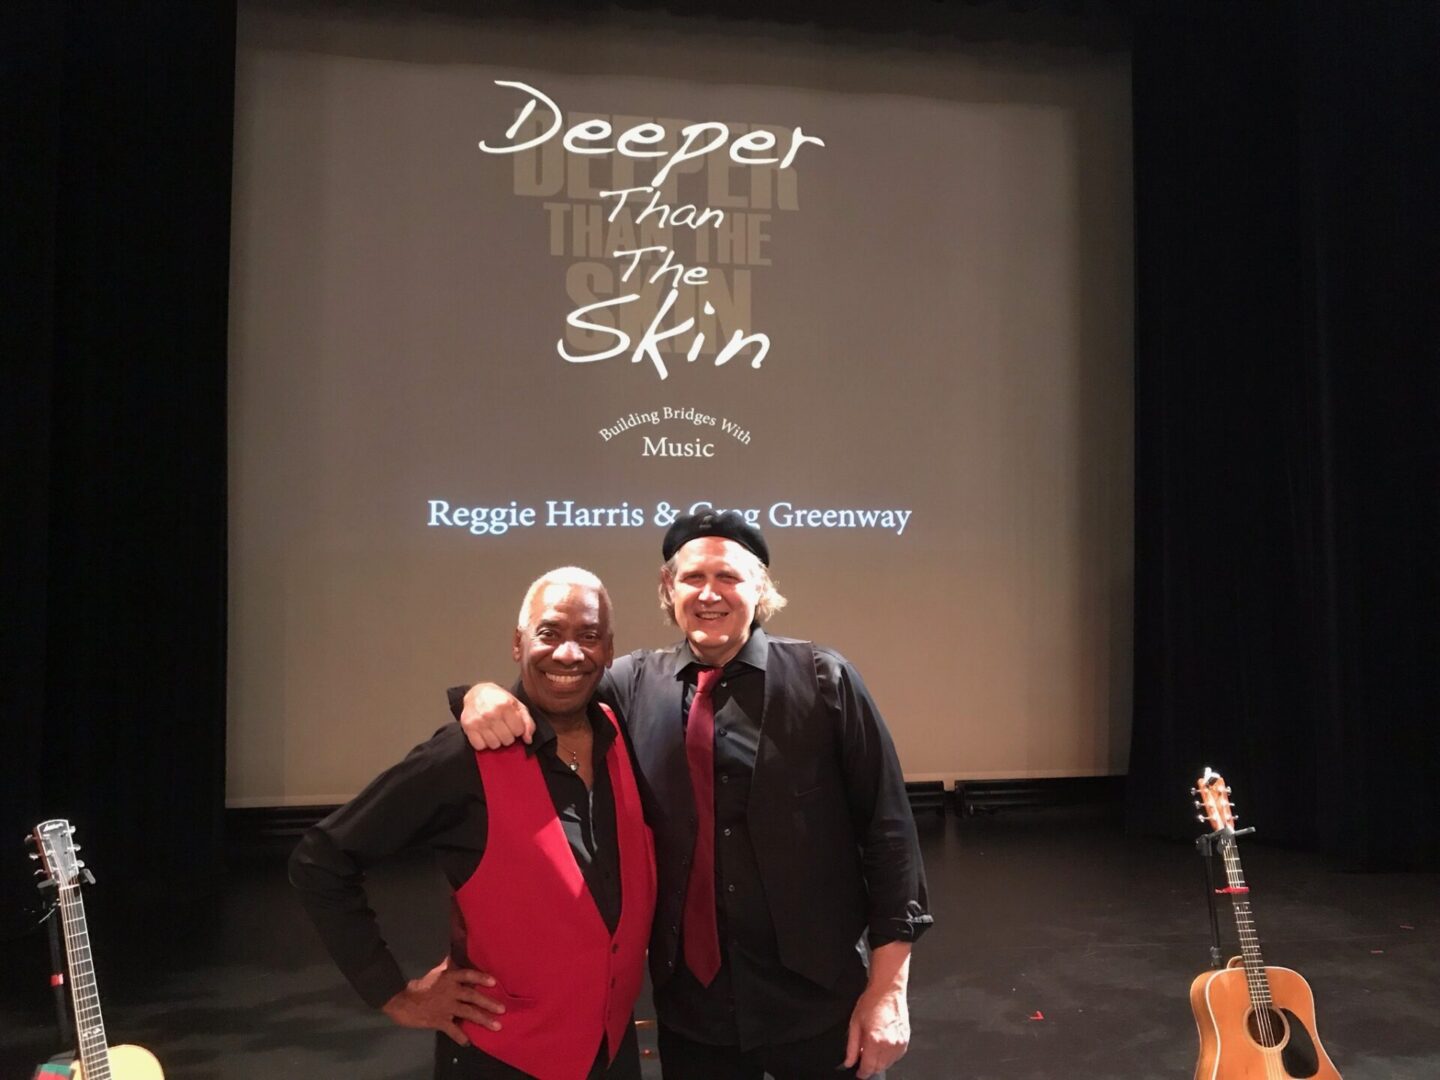 Greg Greenway and Reggie Harris at the Deeper Than the Skin Concert